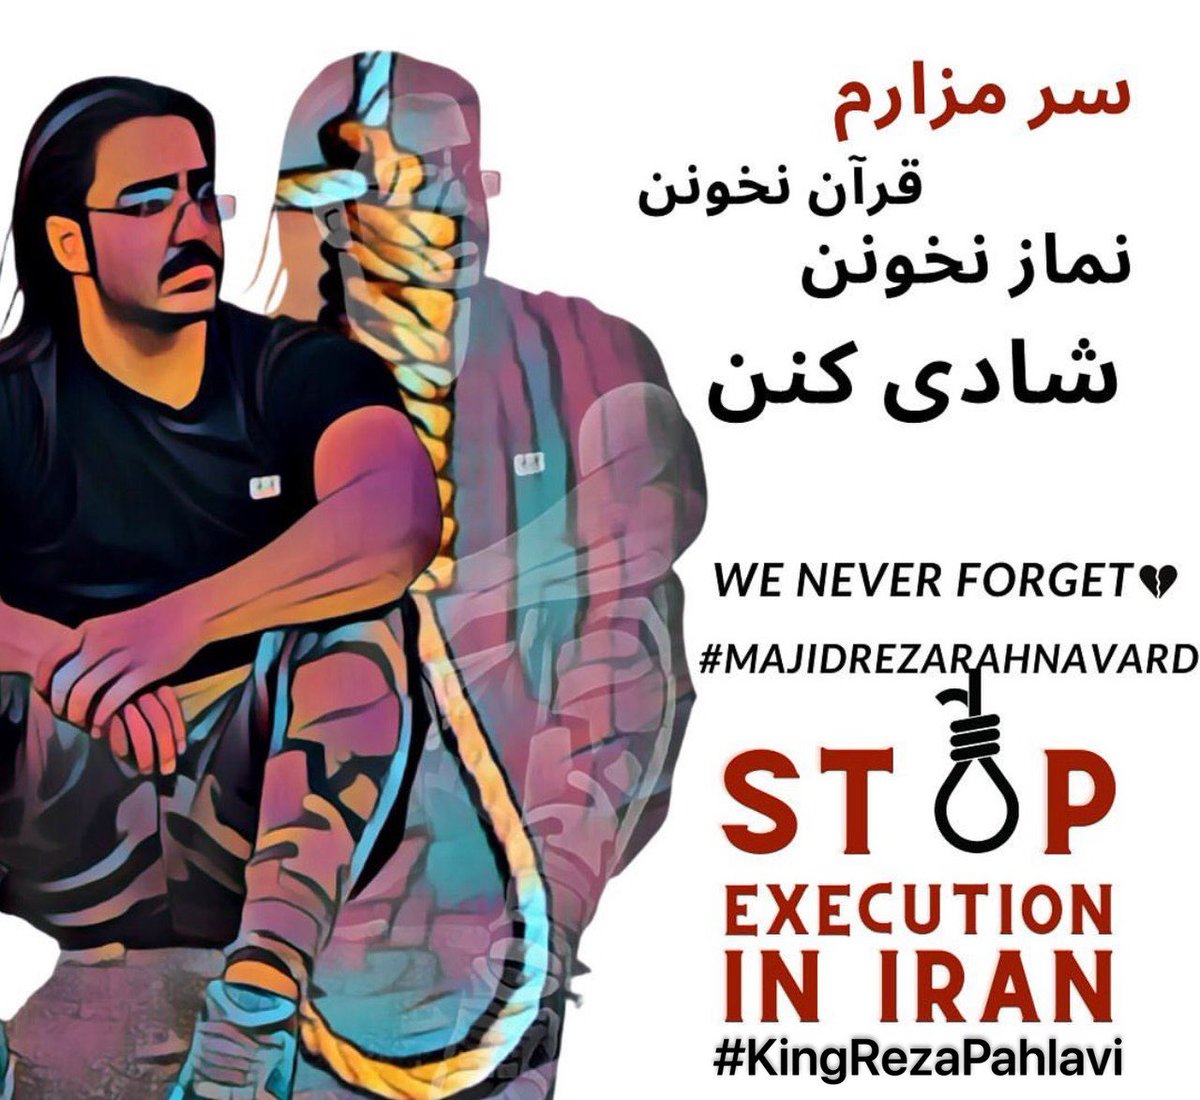 Just a year ago, #MajidRezaRahnavard endured torture and imprisonment at the hands of the Islamic Republic regime before ultimately being hanged, with a broken hand bearing the tattoo of Iran’s Sun and lion flag. His crime? Advocating for freedom. MajidReza, an ardent advocate of…